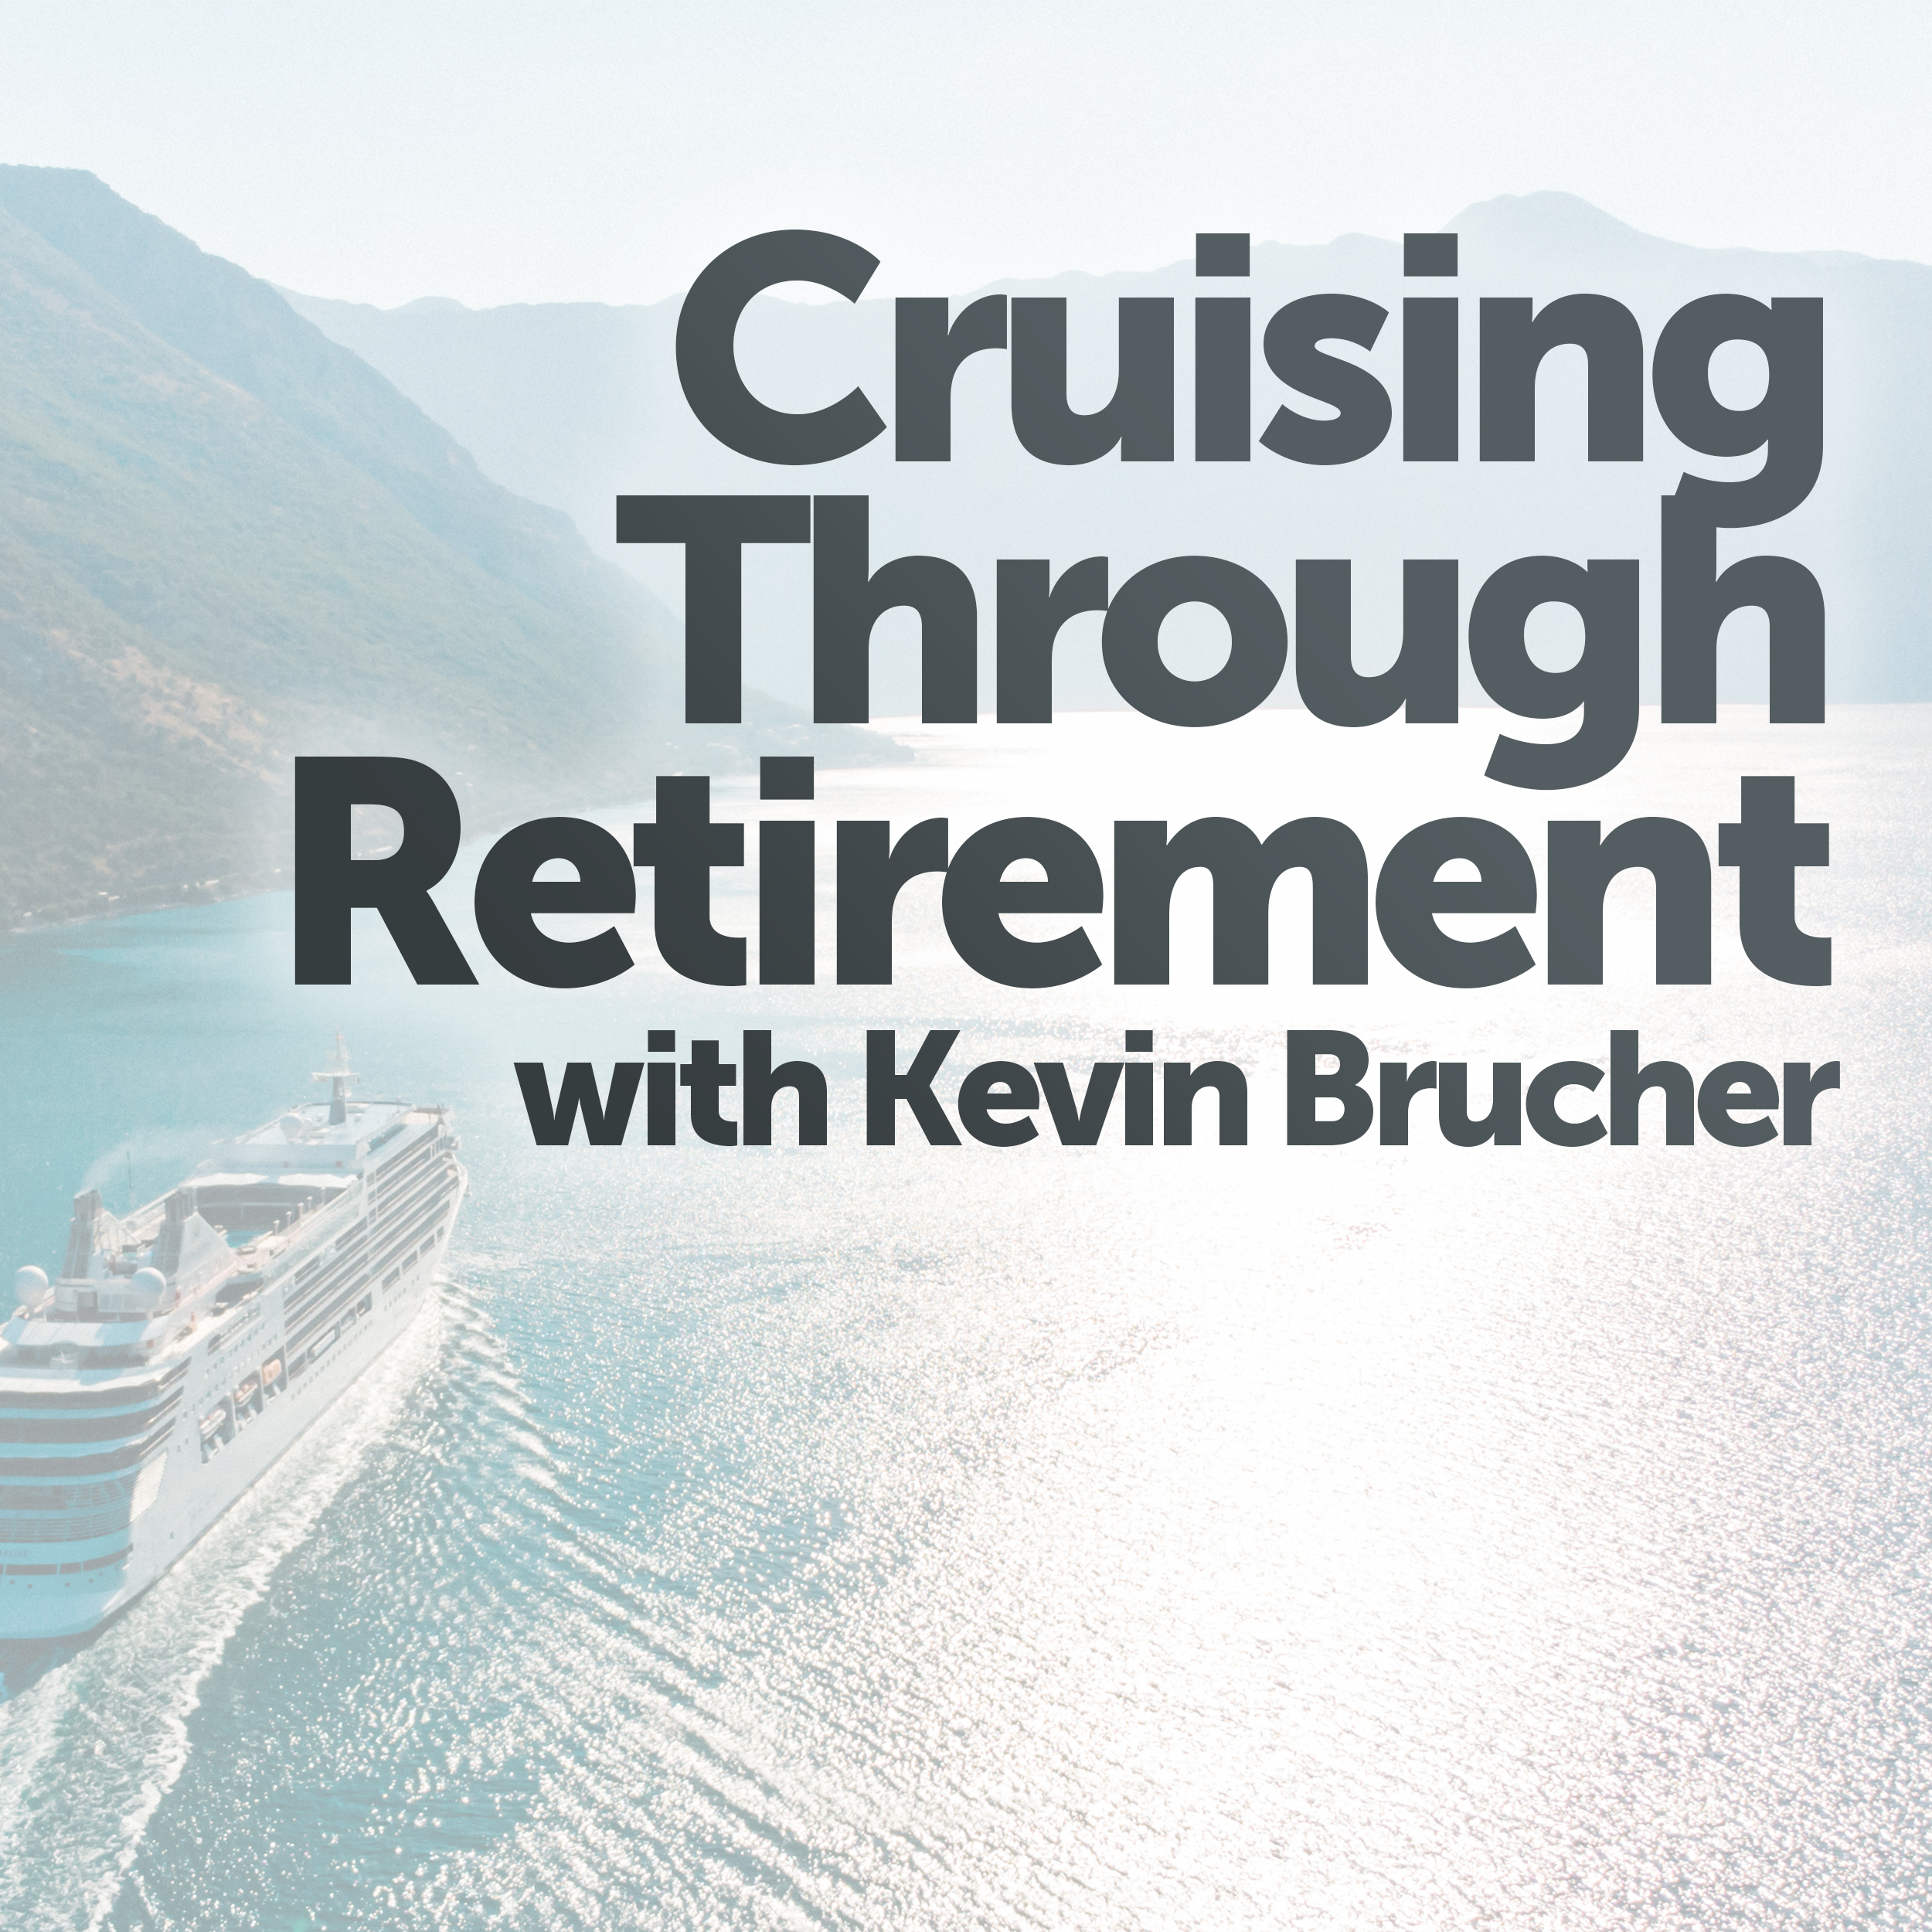 Ep 108 Cruising Through Retirement It’s expensive to grow older in this day and age, even more now than ever before. A recent survey of both pre retirees and financial professionals found they share some of the same concerns.